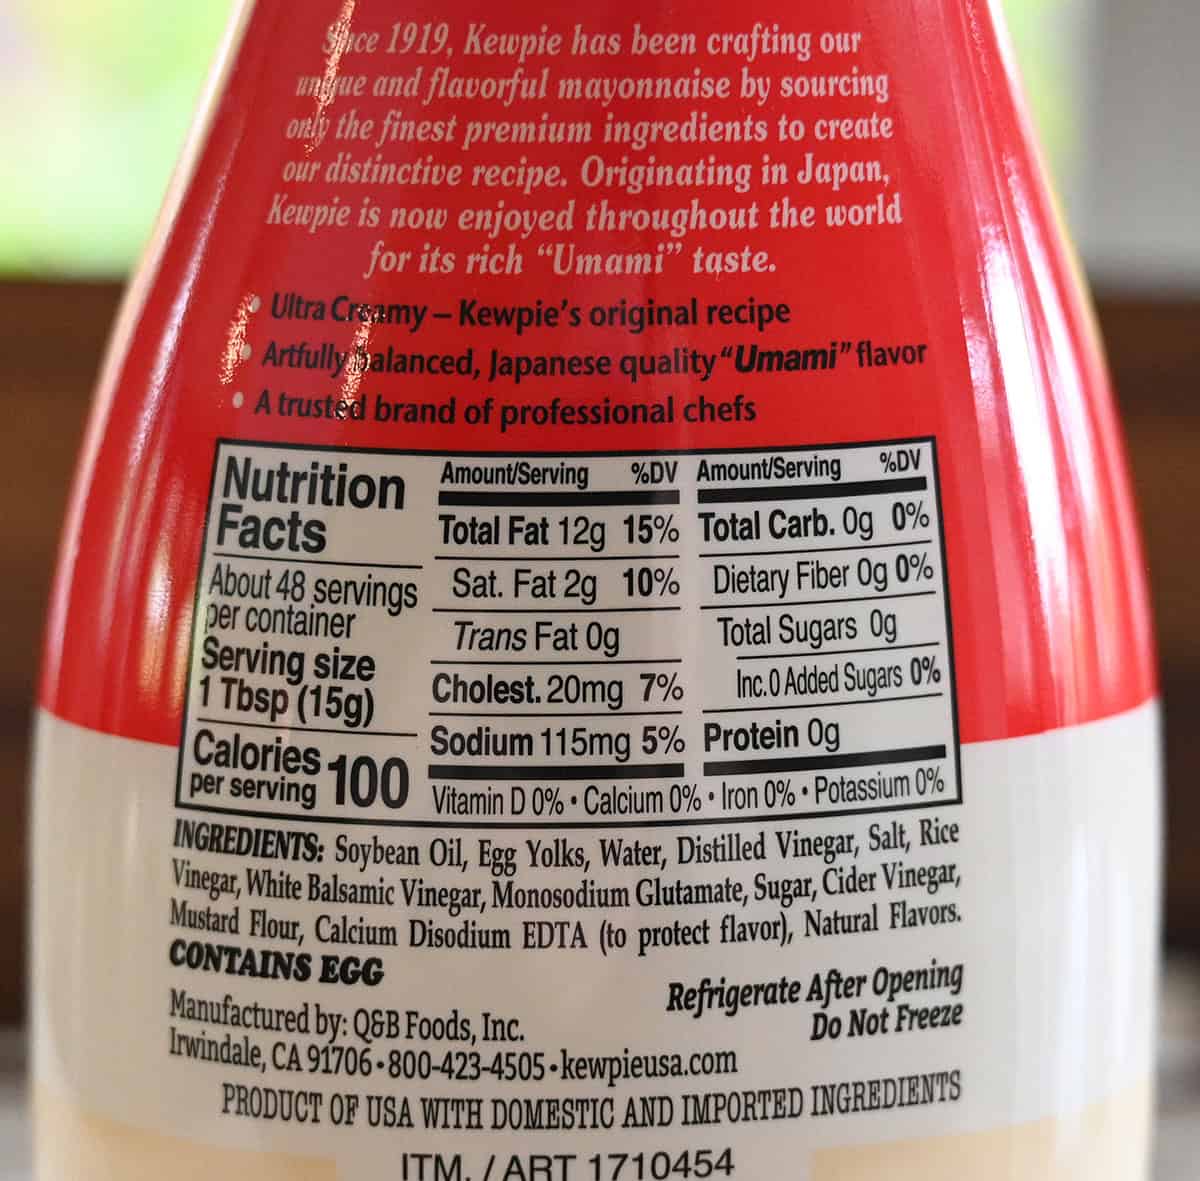 Image of the back of the bottle of Kewpie showing ingredients, nutrition facts and product description.